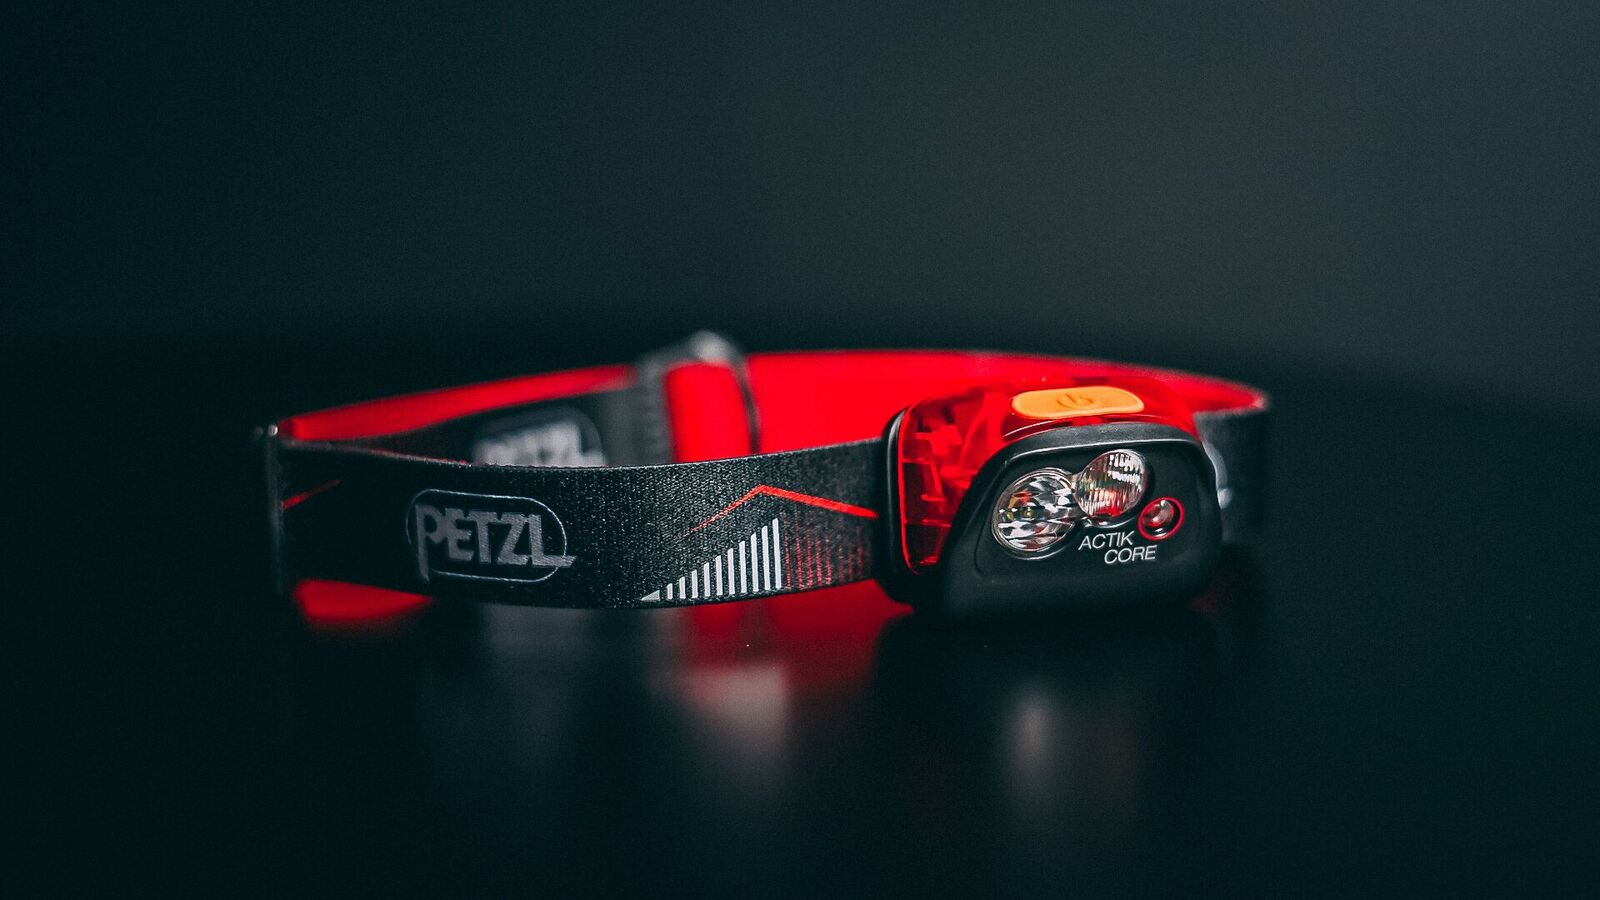 Petzl ACTIK CORE, ZIPKA and e+LITE review, by Mountain and Co